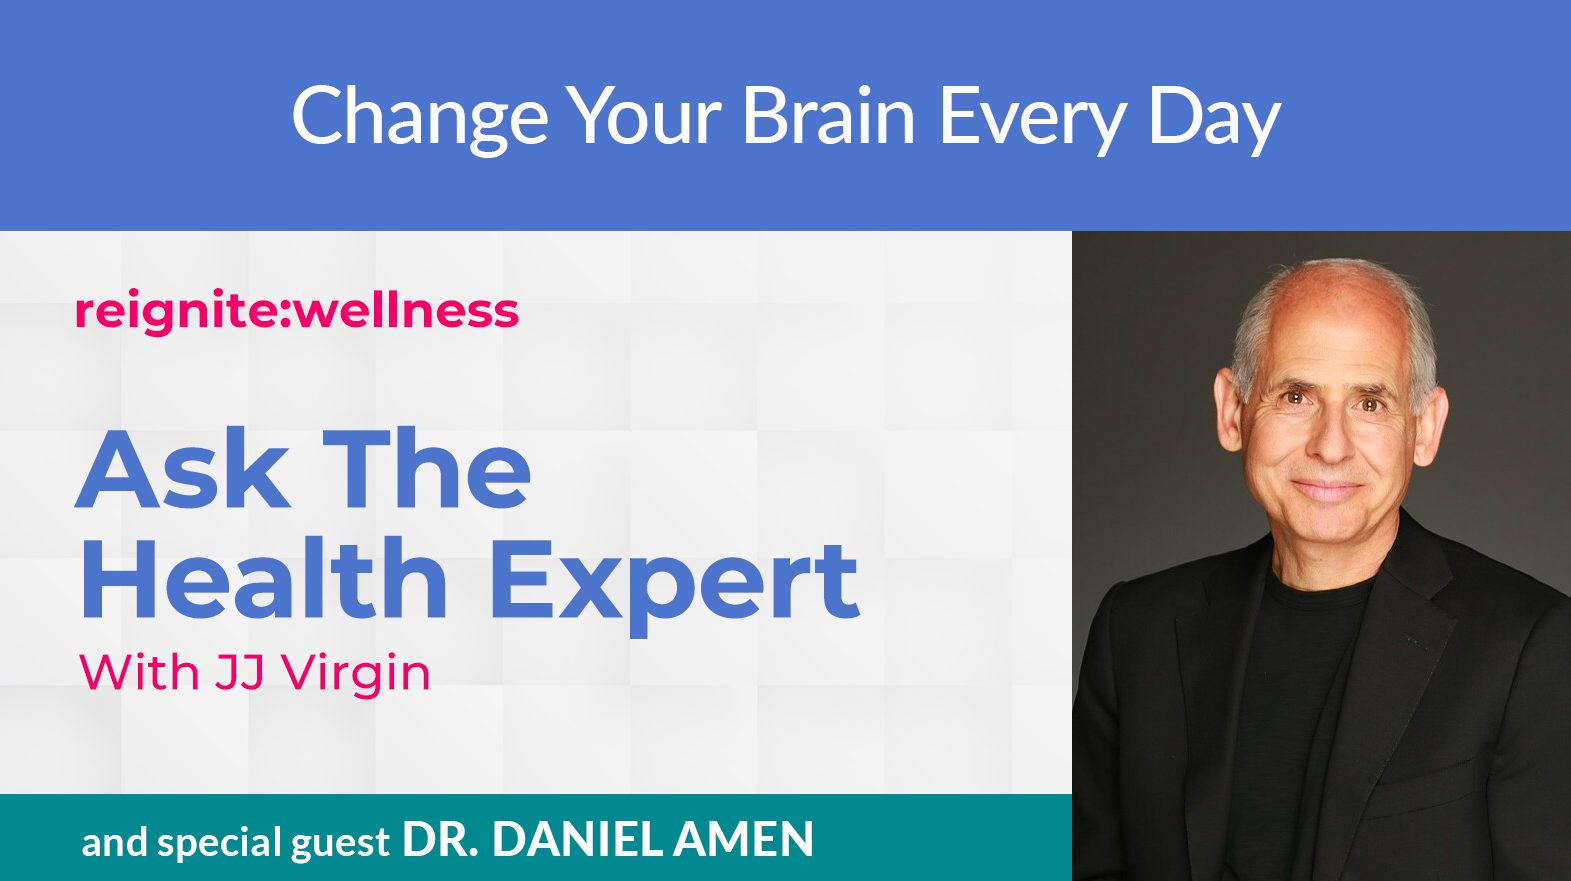 All in Your Head: An Interview with Dr. Daniel Amen